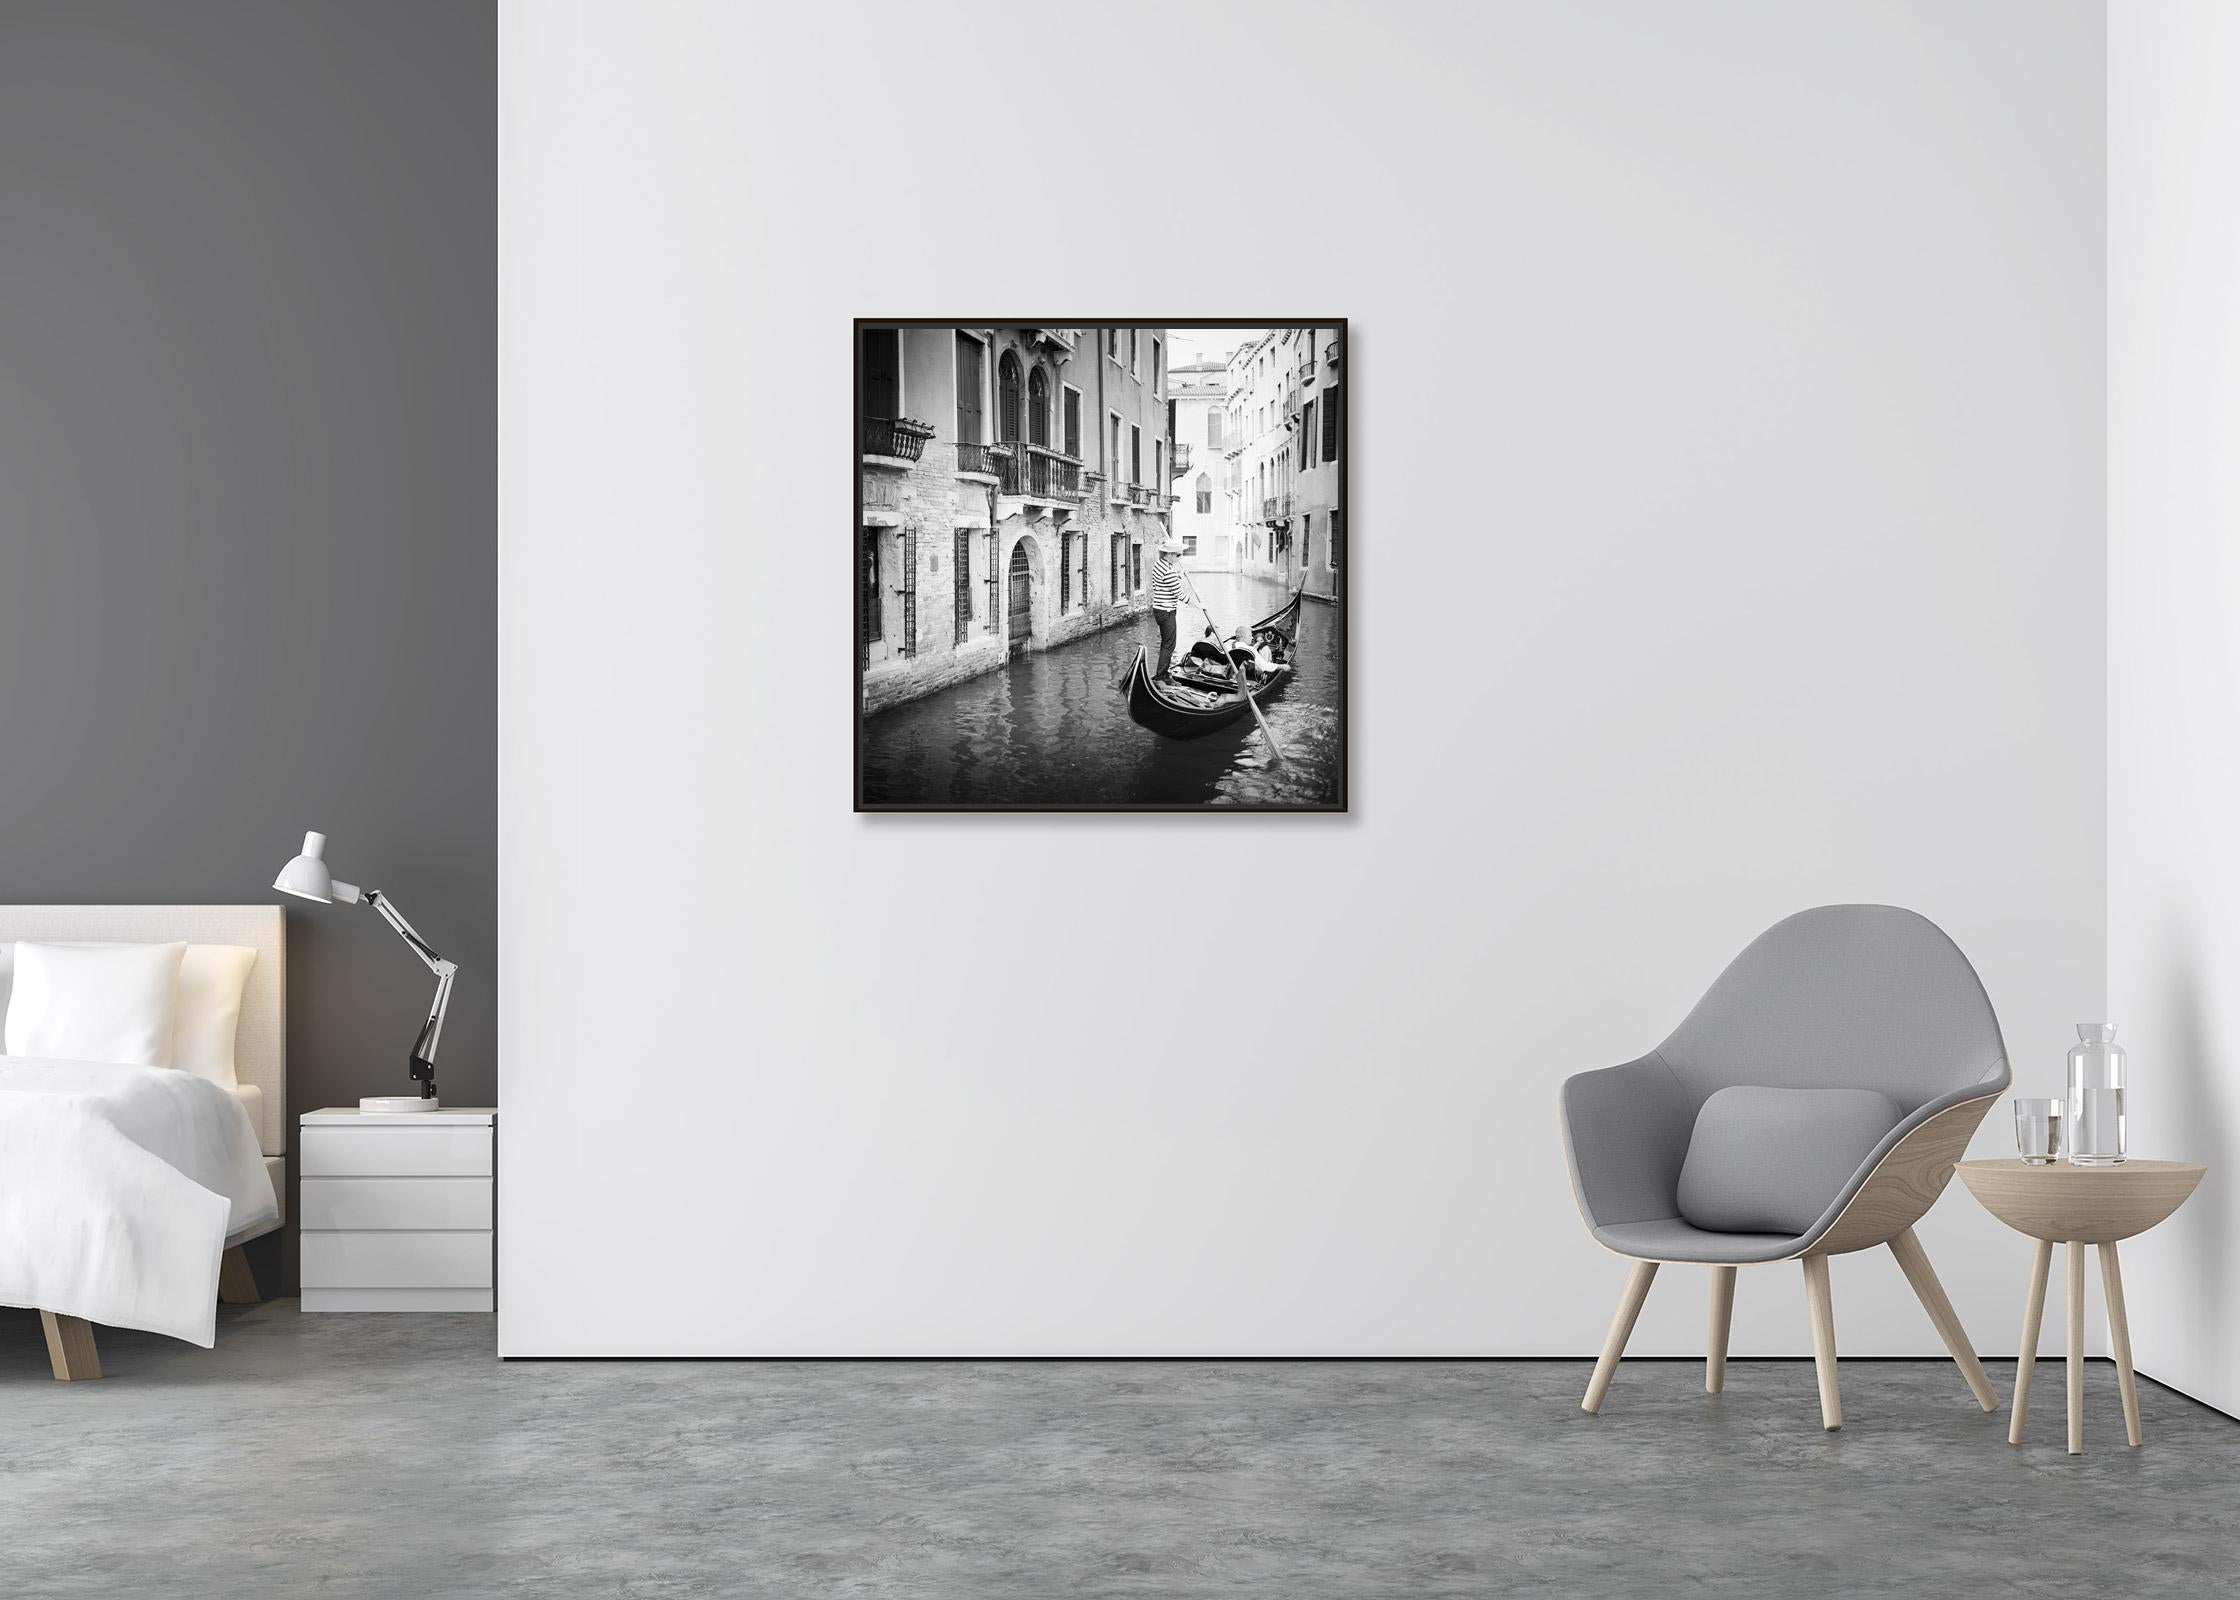 Gondoliere, Venice, Italy, fine art black and white photography, waterscapes - Contemporary Photograph by Gerald Berghammer